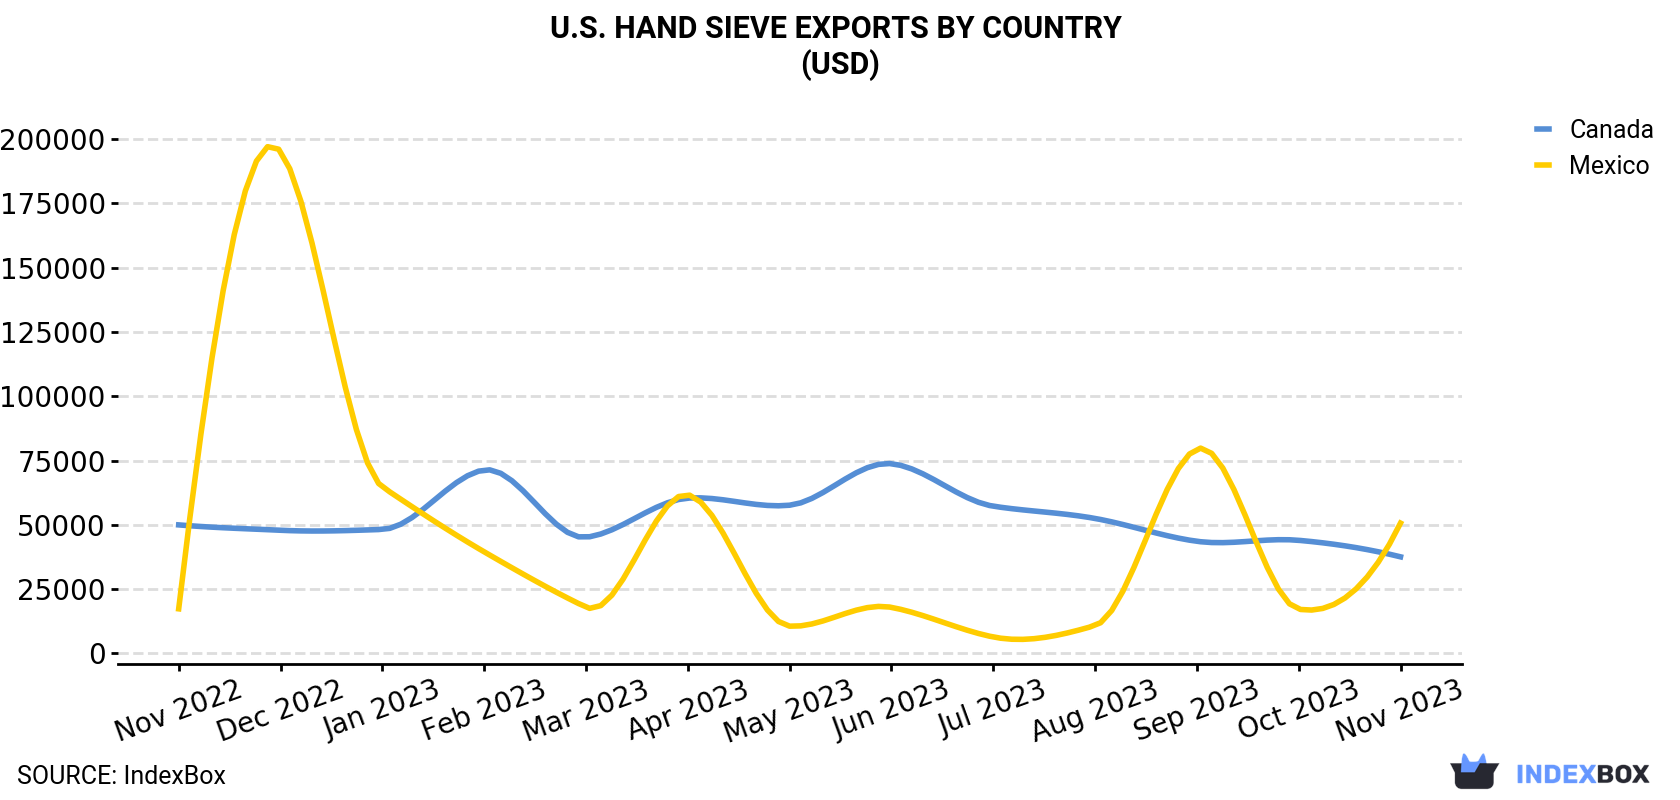 U.S. Hand Sieve Exports By Country (USD)